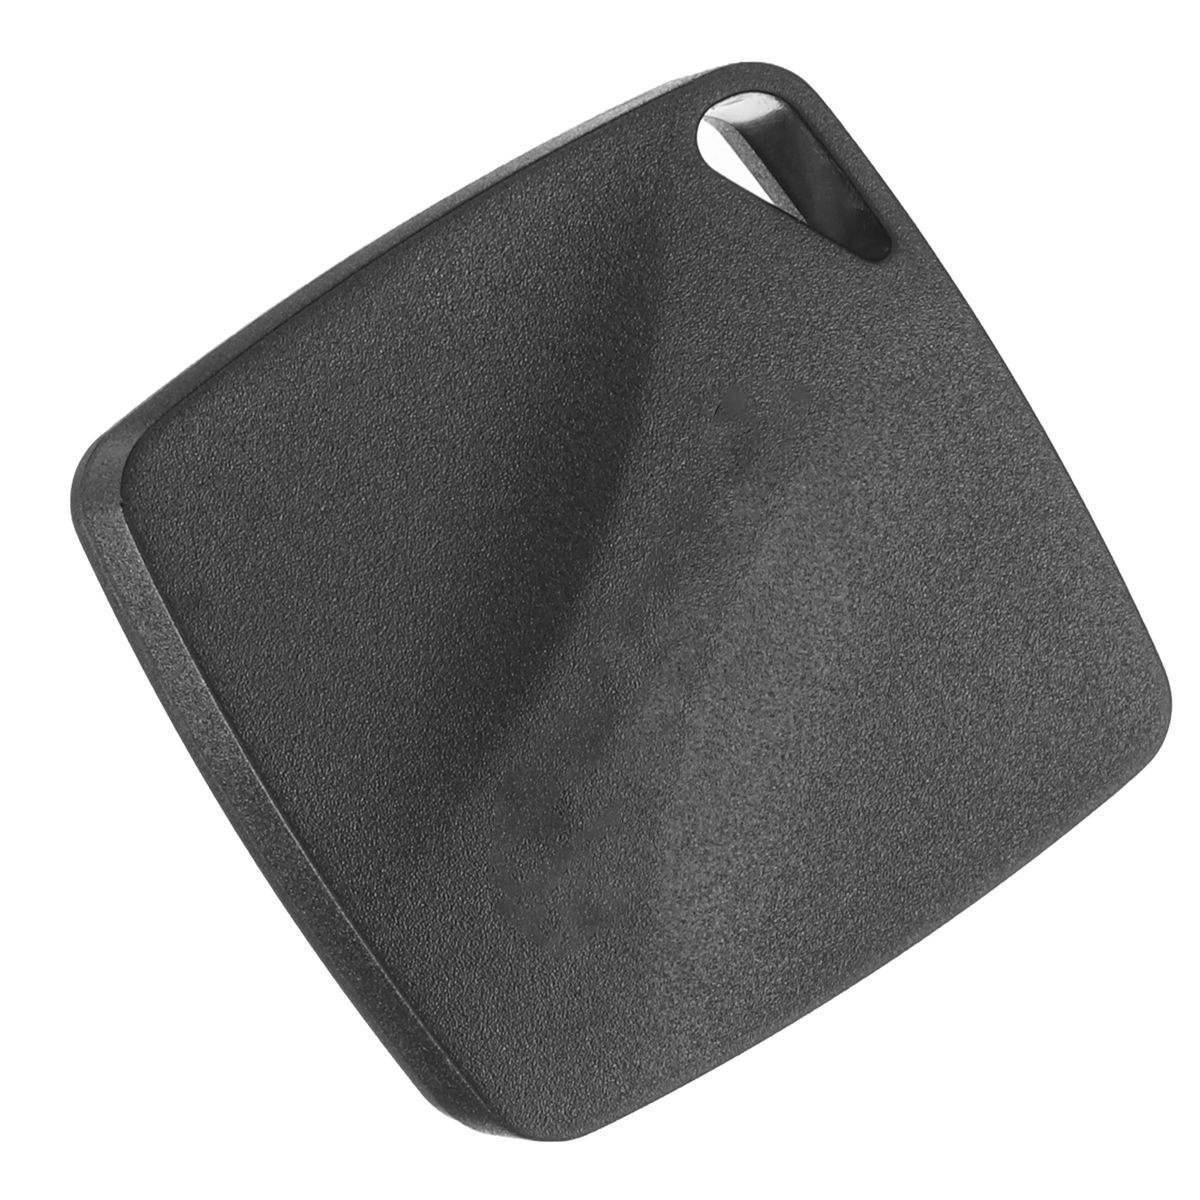 Square-Waterproof-Black-Tracking-Device-Base-Station-Positioning-Location-1725758-5